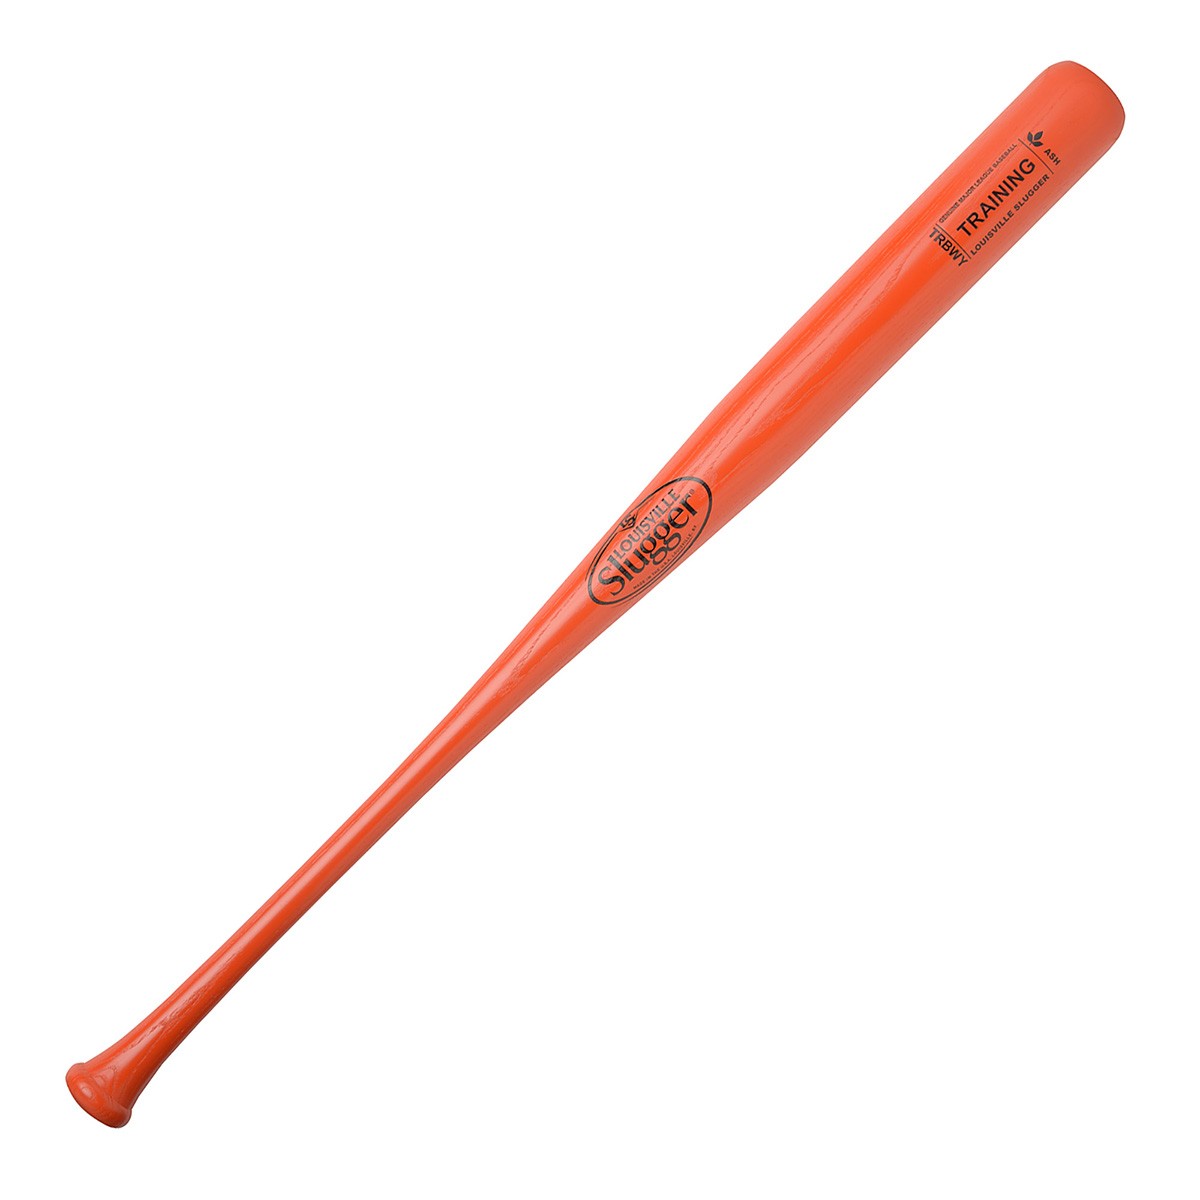 louisville-slugger-trbwy-weighted-training-bat-35-inch-43-oz TRBWY-OR-35 Louisville  Versatile 5-in-1 weighted training bat Off-field strengthening and stretching exercises On-field